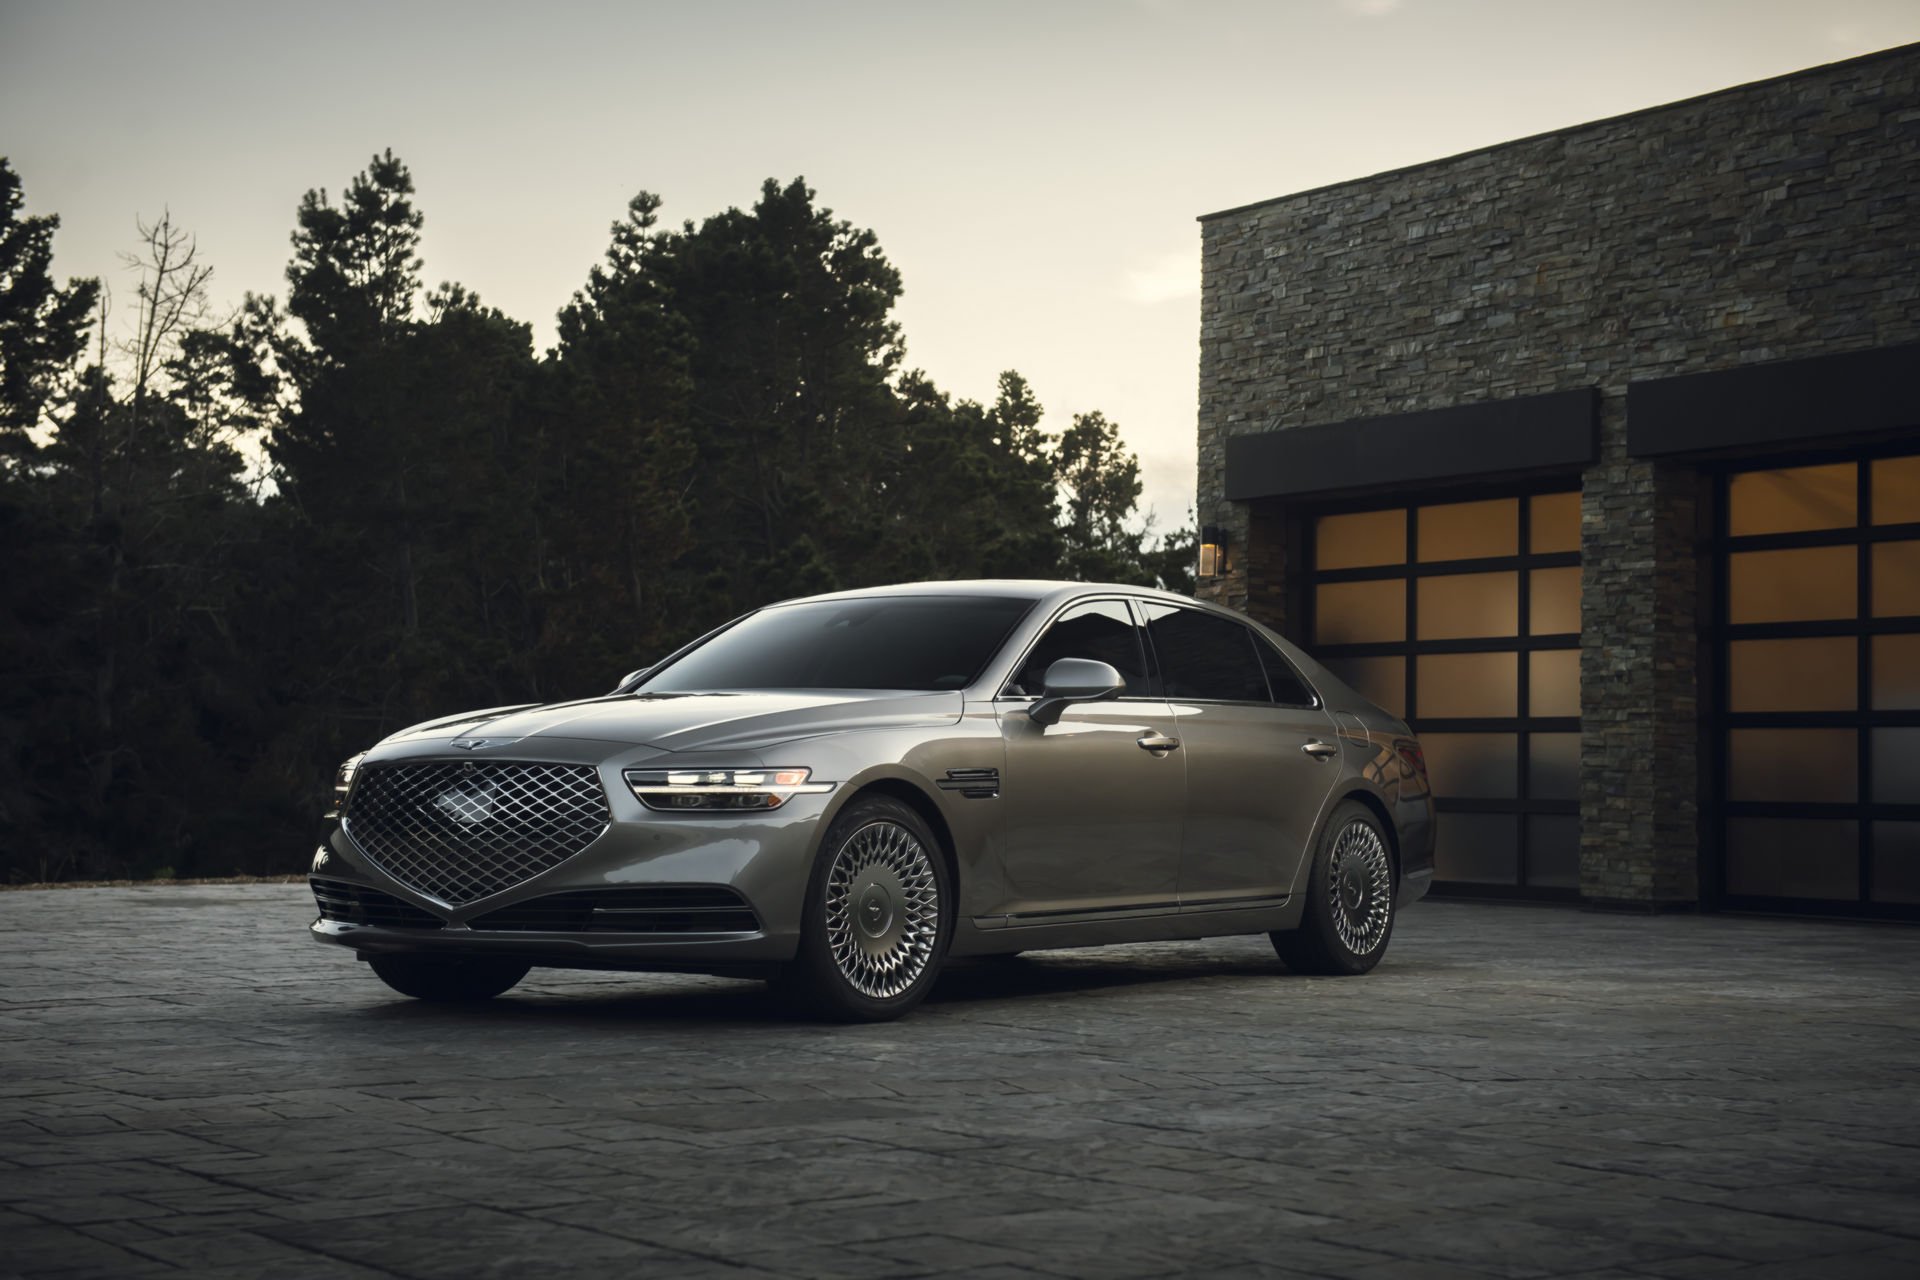 2020 Genesis G90 U.S. Pricing Announced: $72,200 for the 3 ...